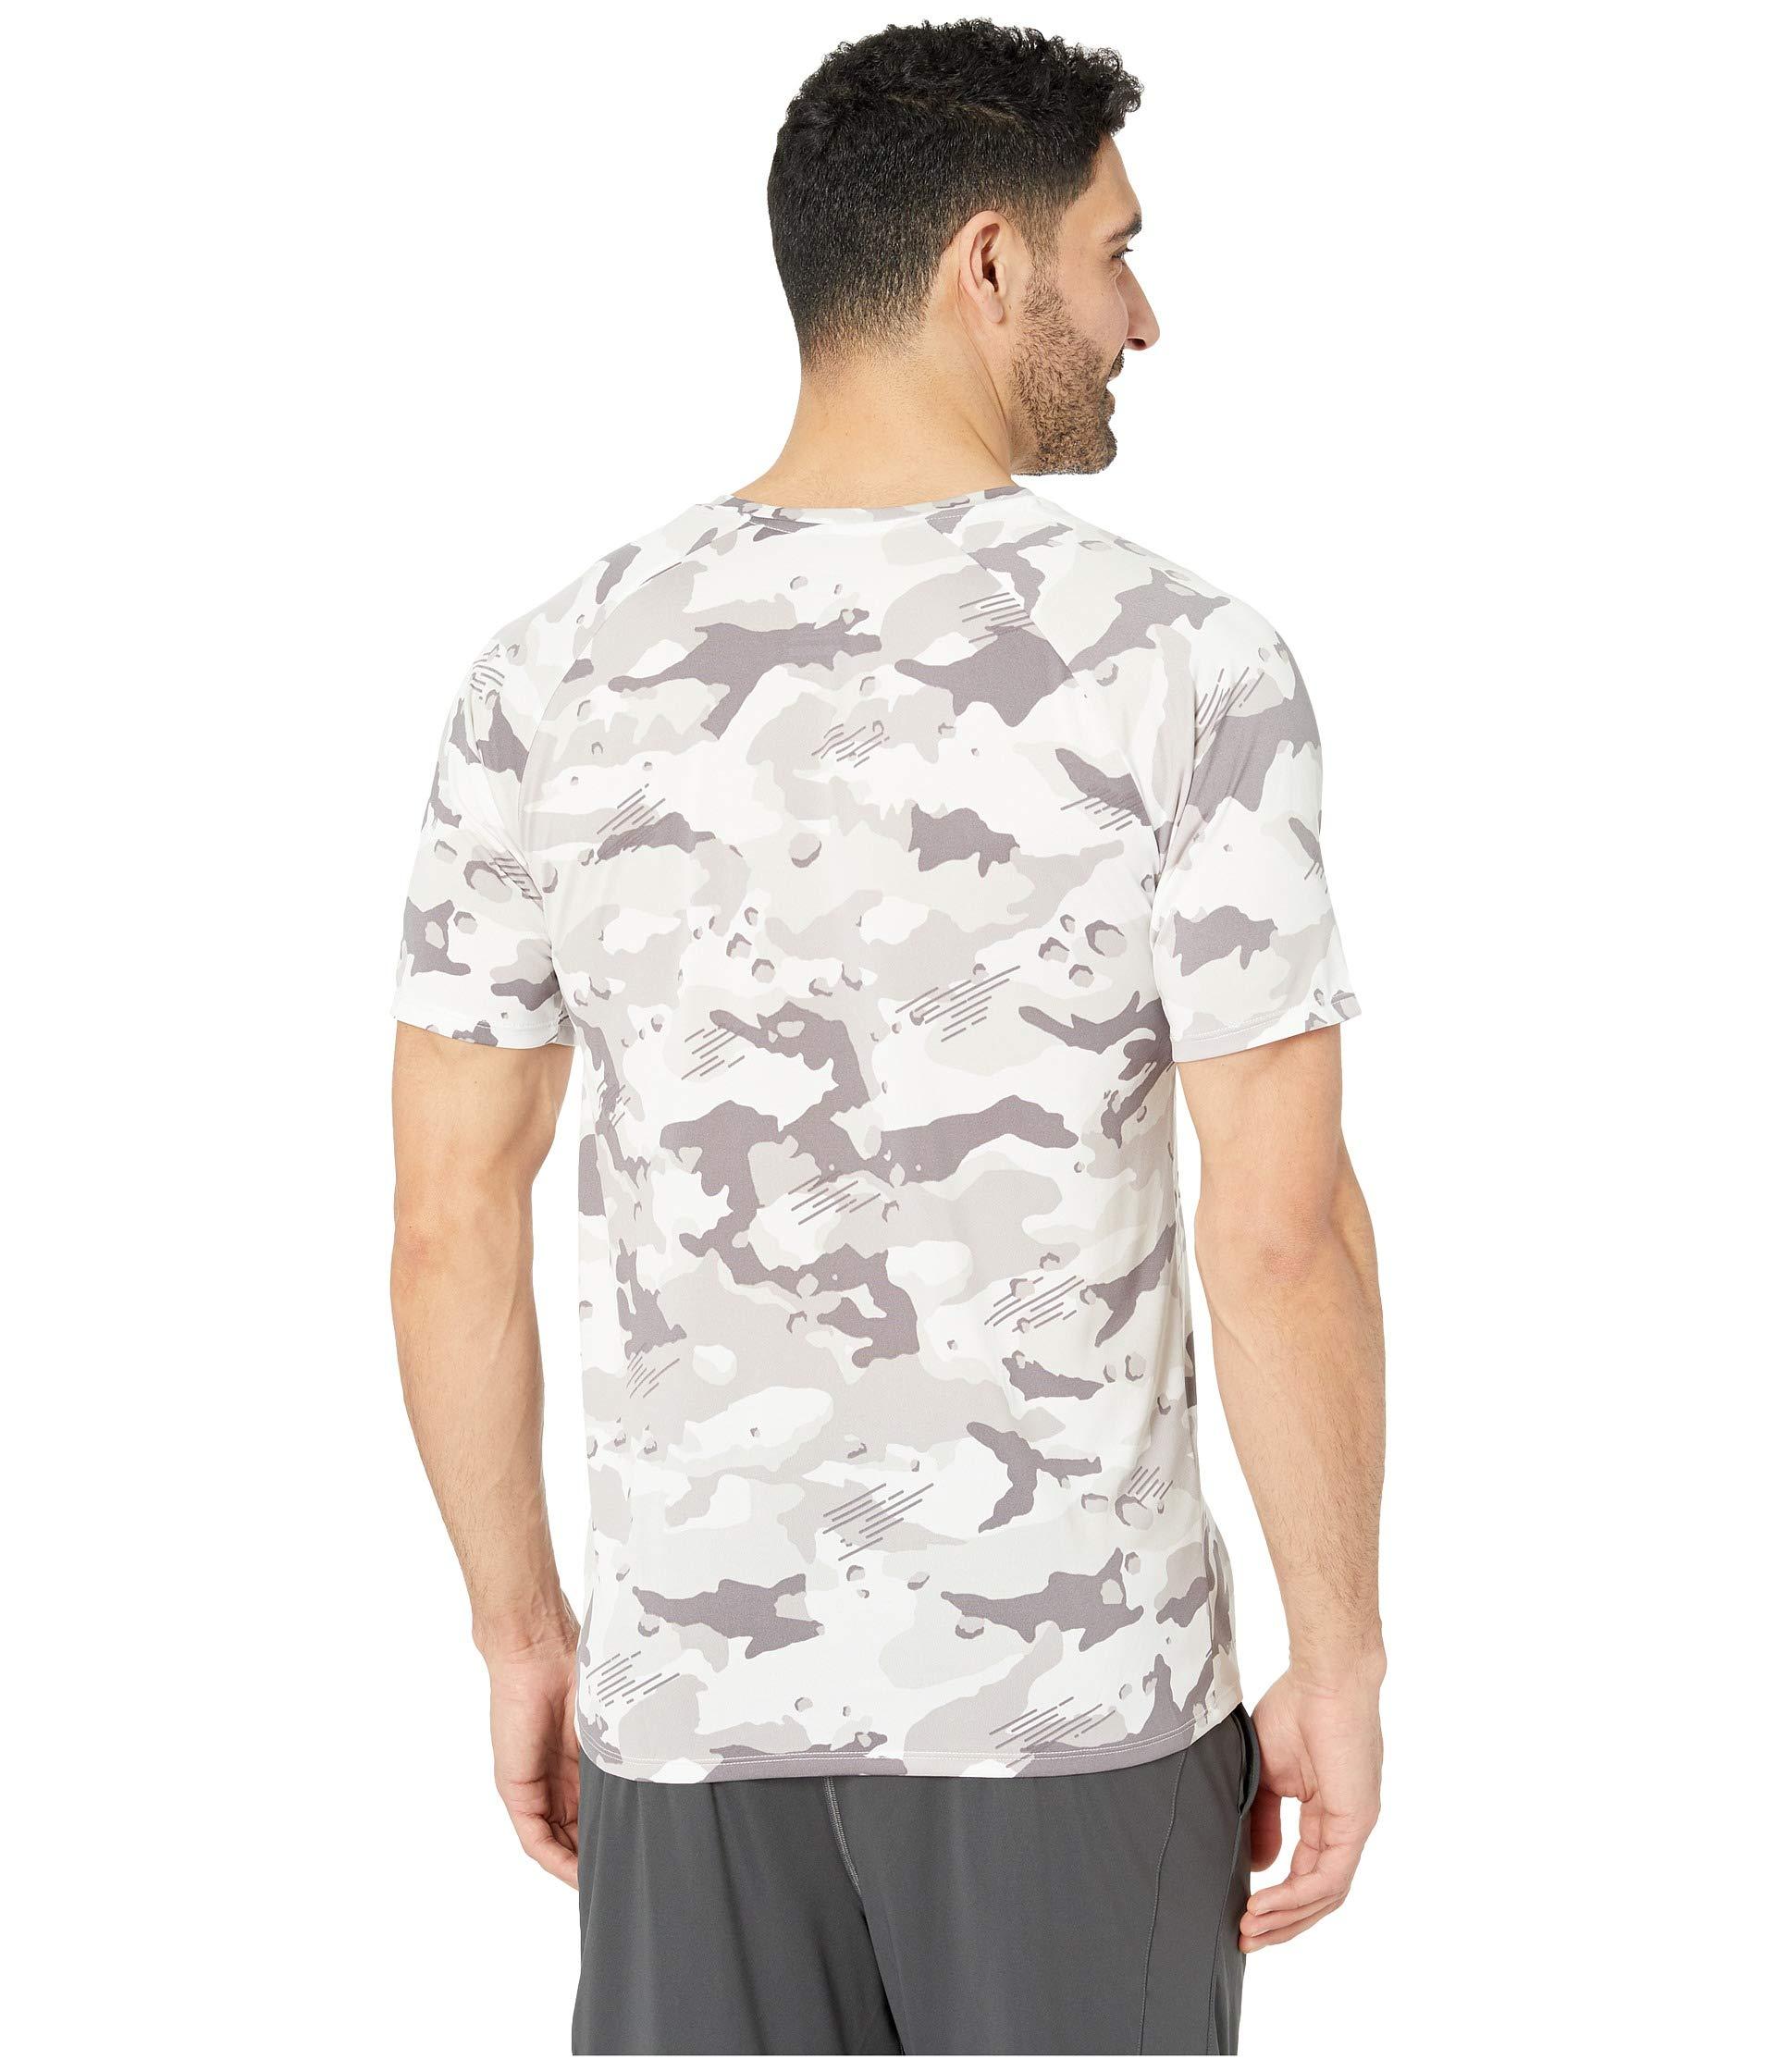 Nike Cotton Dry Legend Tee Camo All Over Print in White/Black Camo (White)  for Men - Lyst